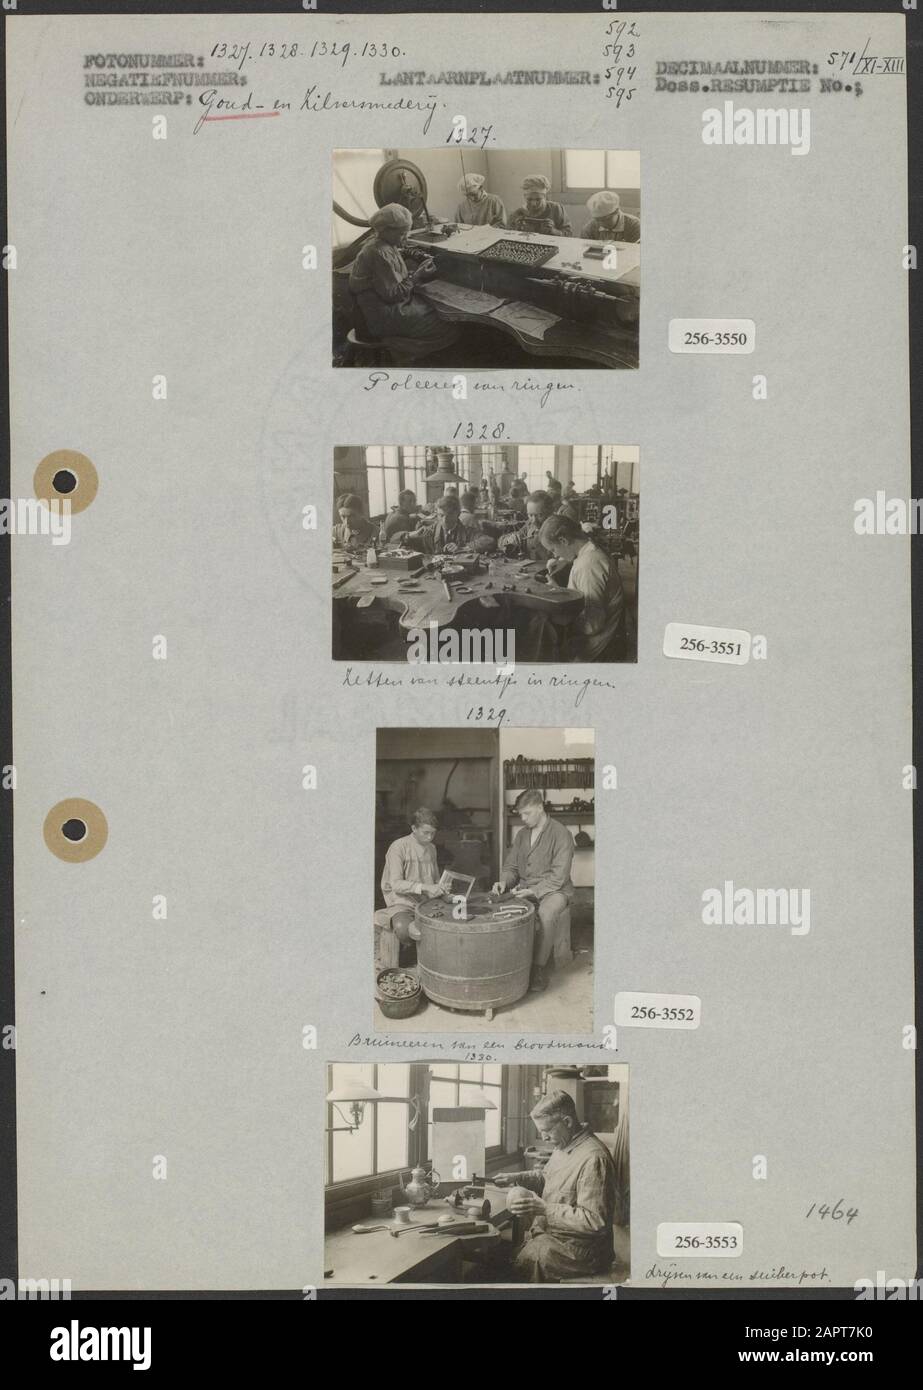 Gold And Silversmith Photo 1 Polating Or Polishing Rings 5x7 Cm Unknown Photo 2 Putting Stones In Rings 5x7 Cm Unknown Photo 3 Brown A Bread Basket 7x 5 Cm Unknown Photo,How To Make Long Island Iced Tea By The Gallon